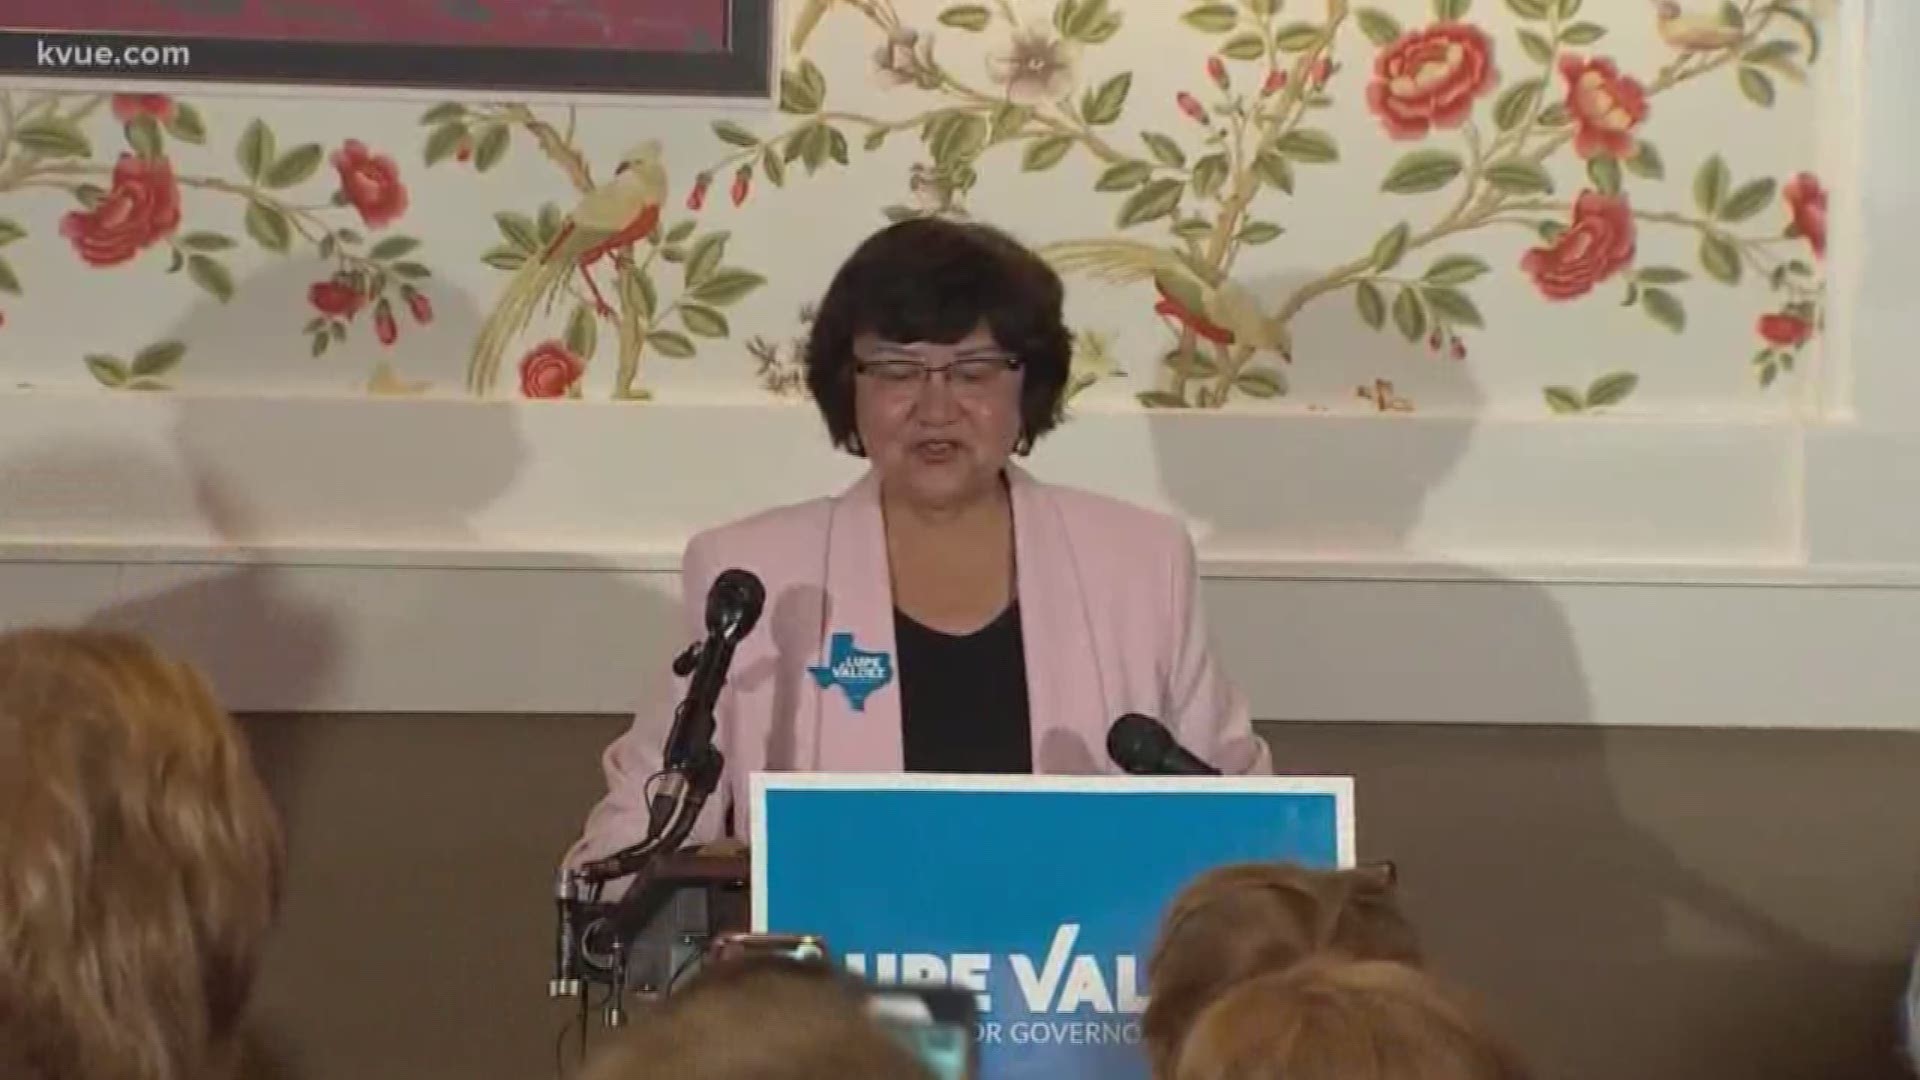 Texans have selected former Dallas County Sheriff Lupe Valdez as the democratic candidate in the 2018 Texas Primary Run-Off election.